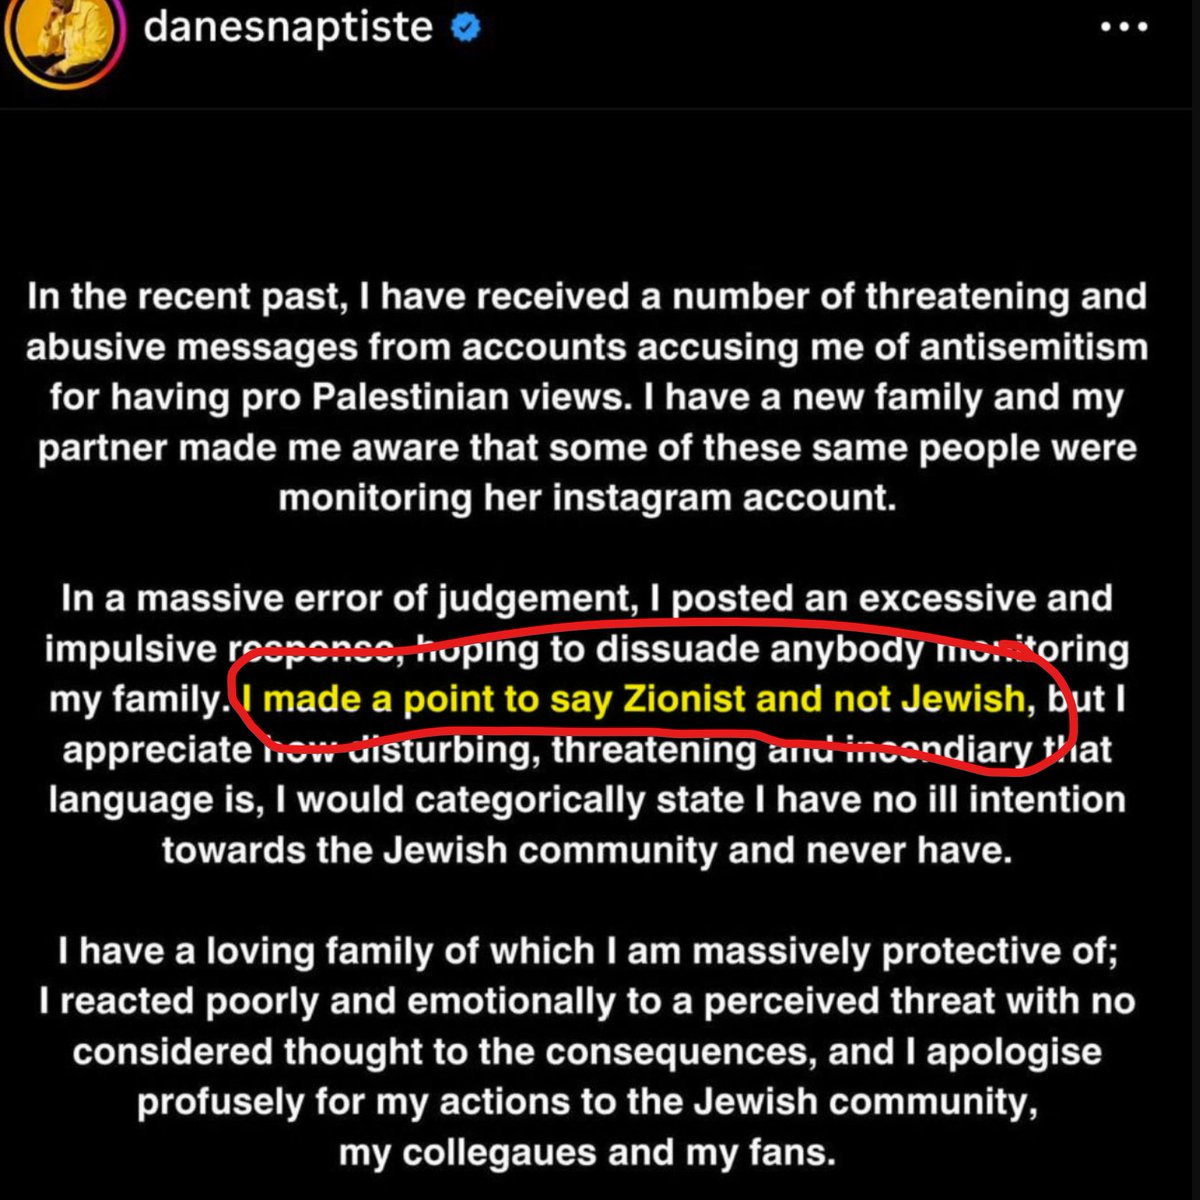 UK comic and BBC star Dane Baptiste clarifies that his graphic public declaration of willingness in sit in jail for the pleasure of murdering a fellow comedian for the crime of following his wife on social media, was an anti-Zionist death threat, not an antisemitic death threat.